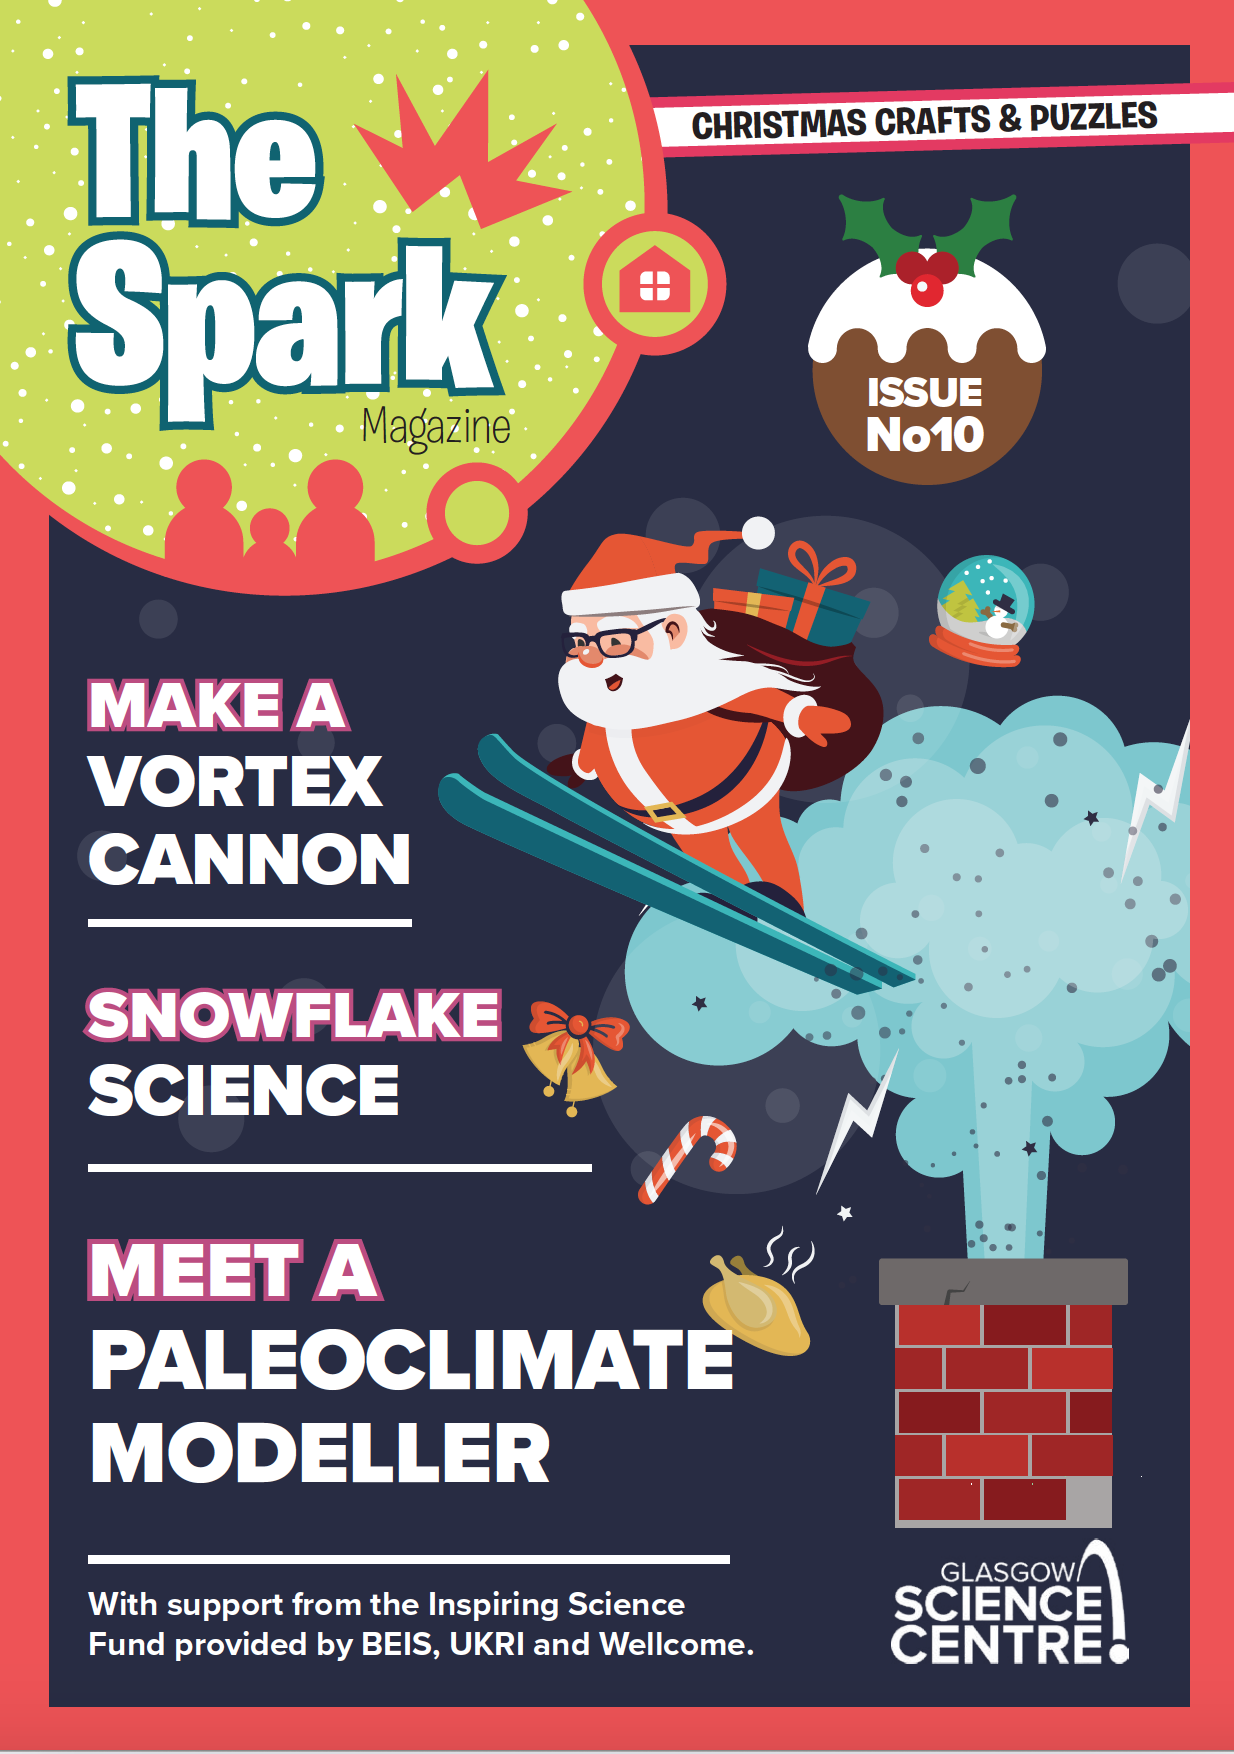 The front cover of The Spark - Issue 10 shows an illustrated Santa on skis 'flying' out of a chimney